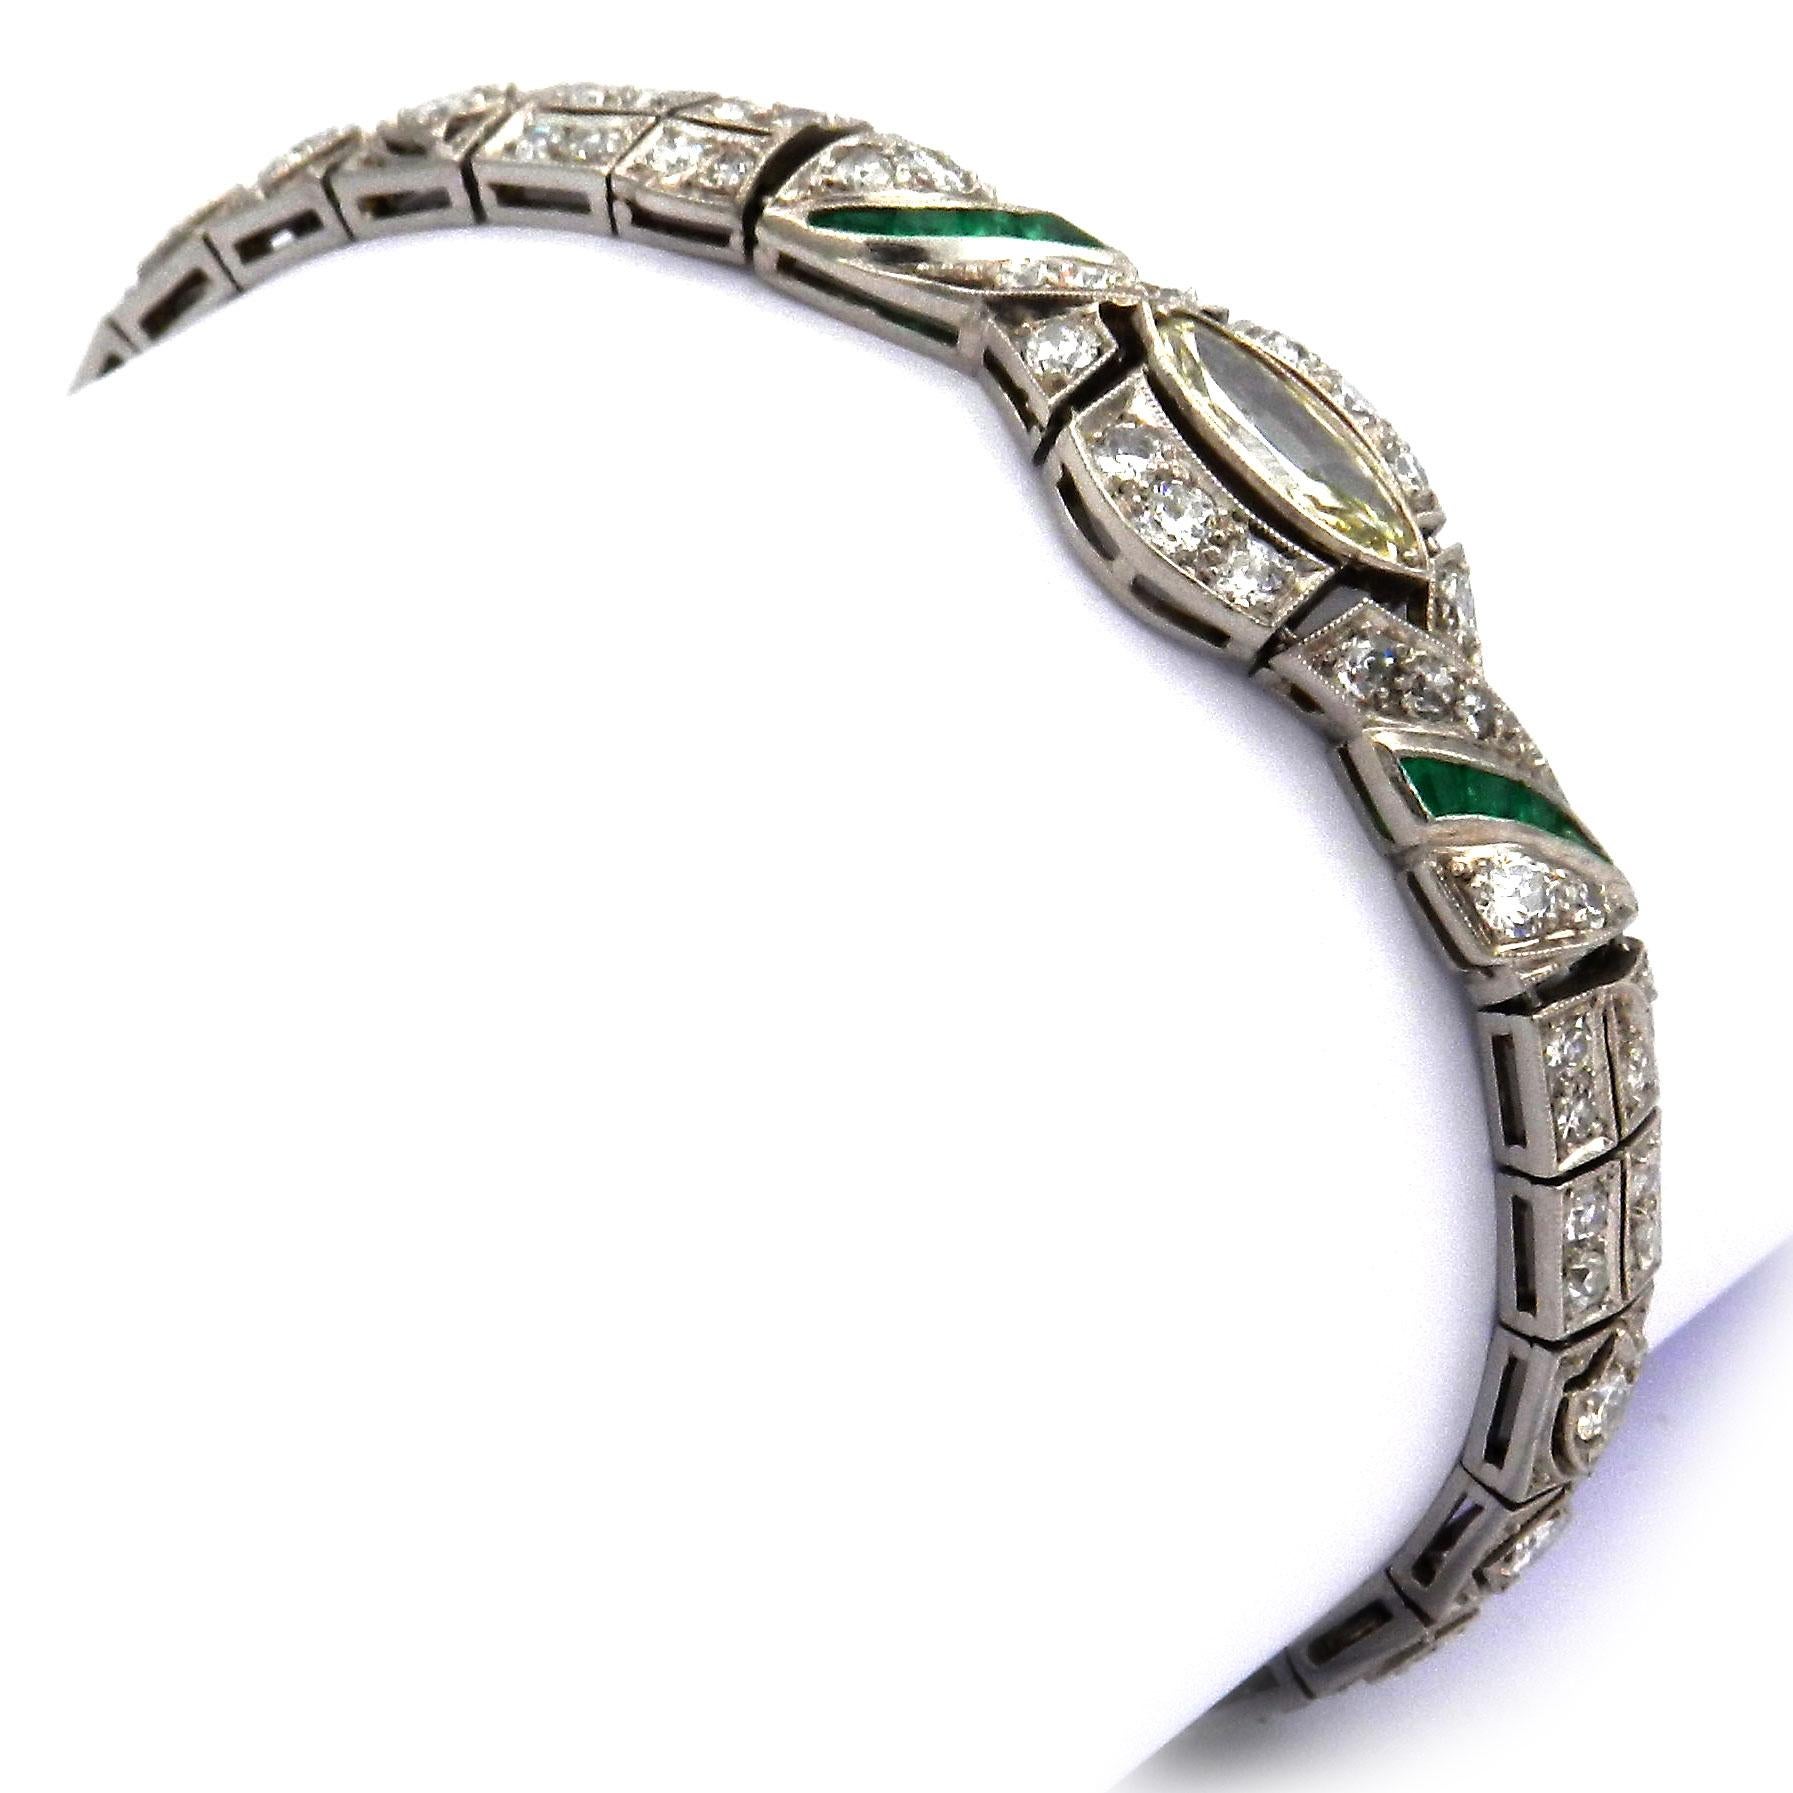 Art Deco 3.51 ct Diamond Emerald Platinum Bracelet circa 1920

Elegant bracelet made of geometric links, centrally set with a diamond navette weighing 0.6 ct, framed by diamonds and calibrated emerald squares and completely set with 72 radiant